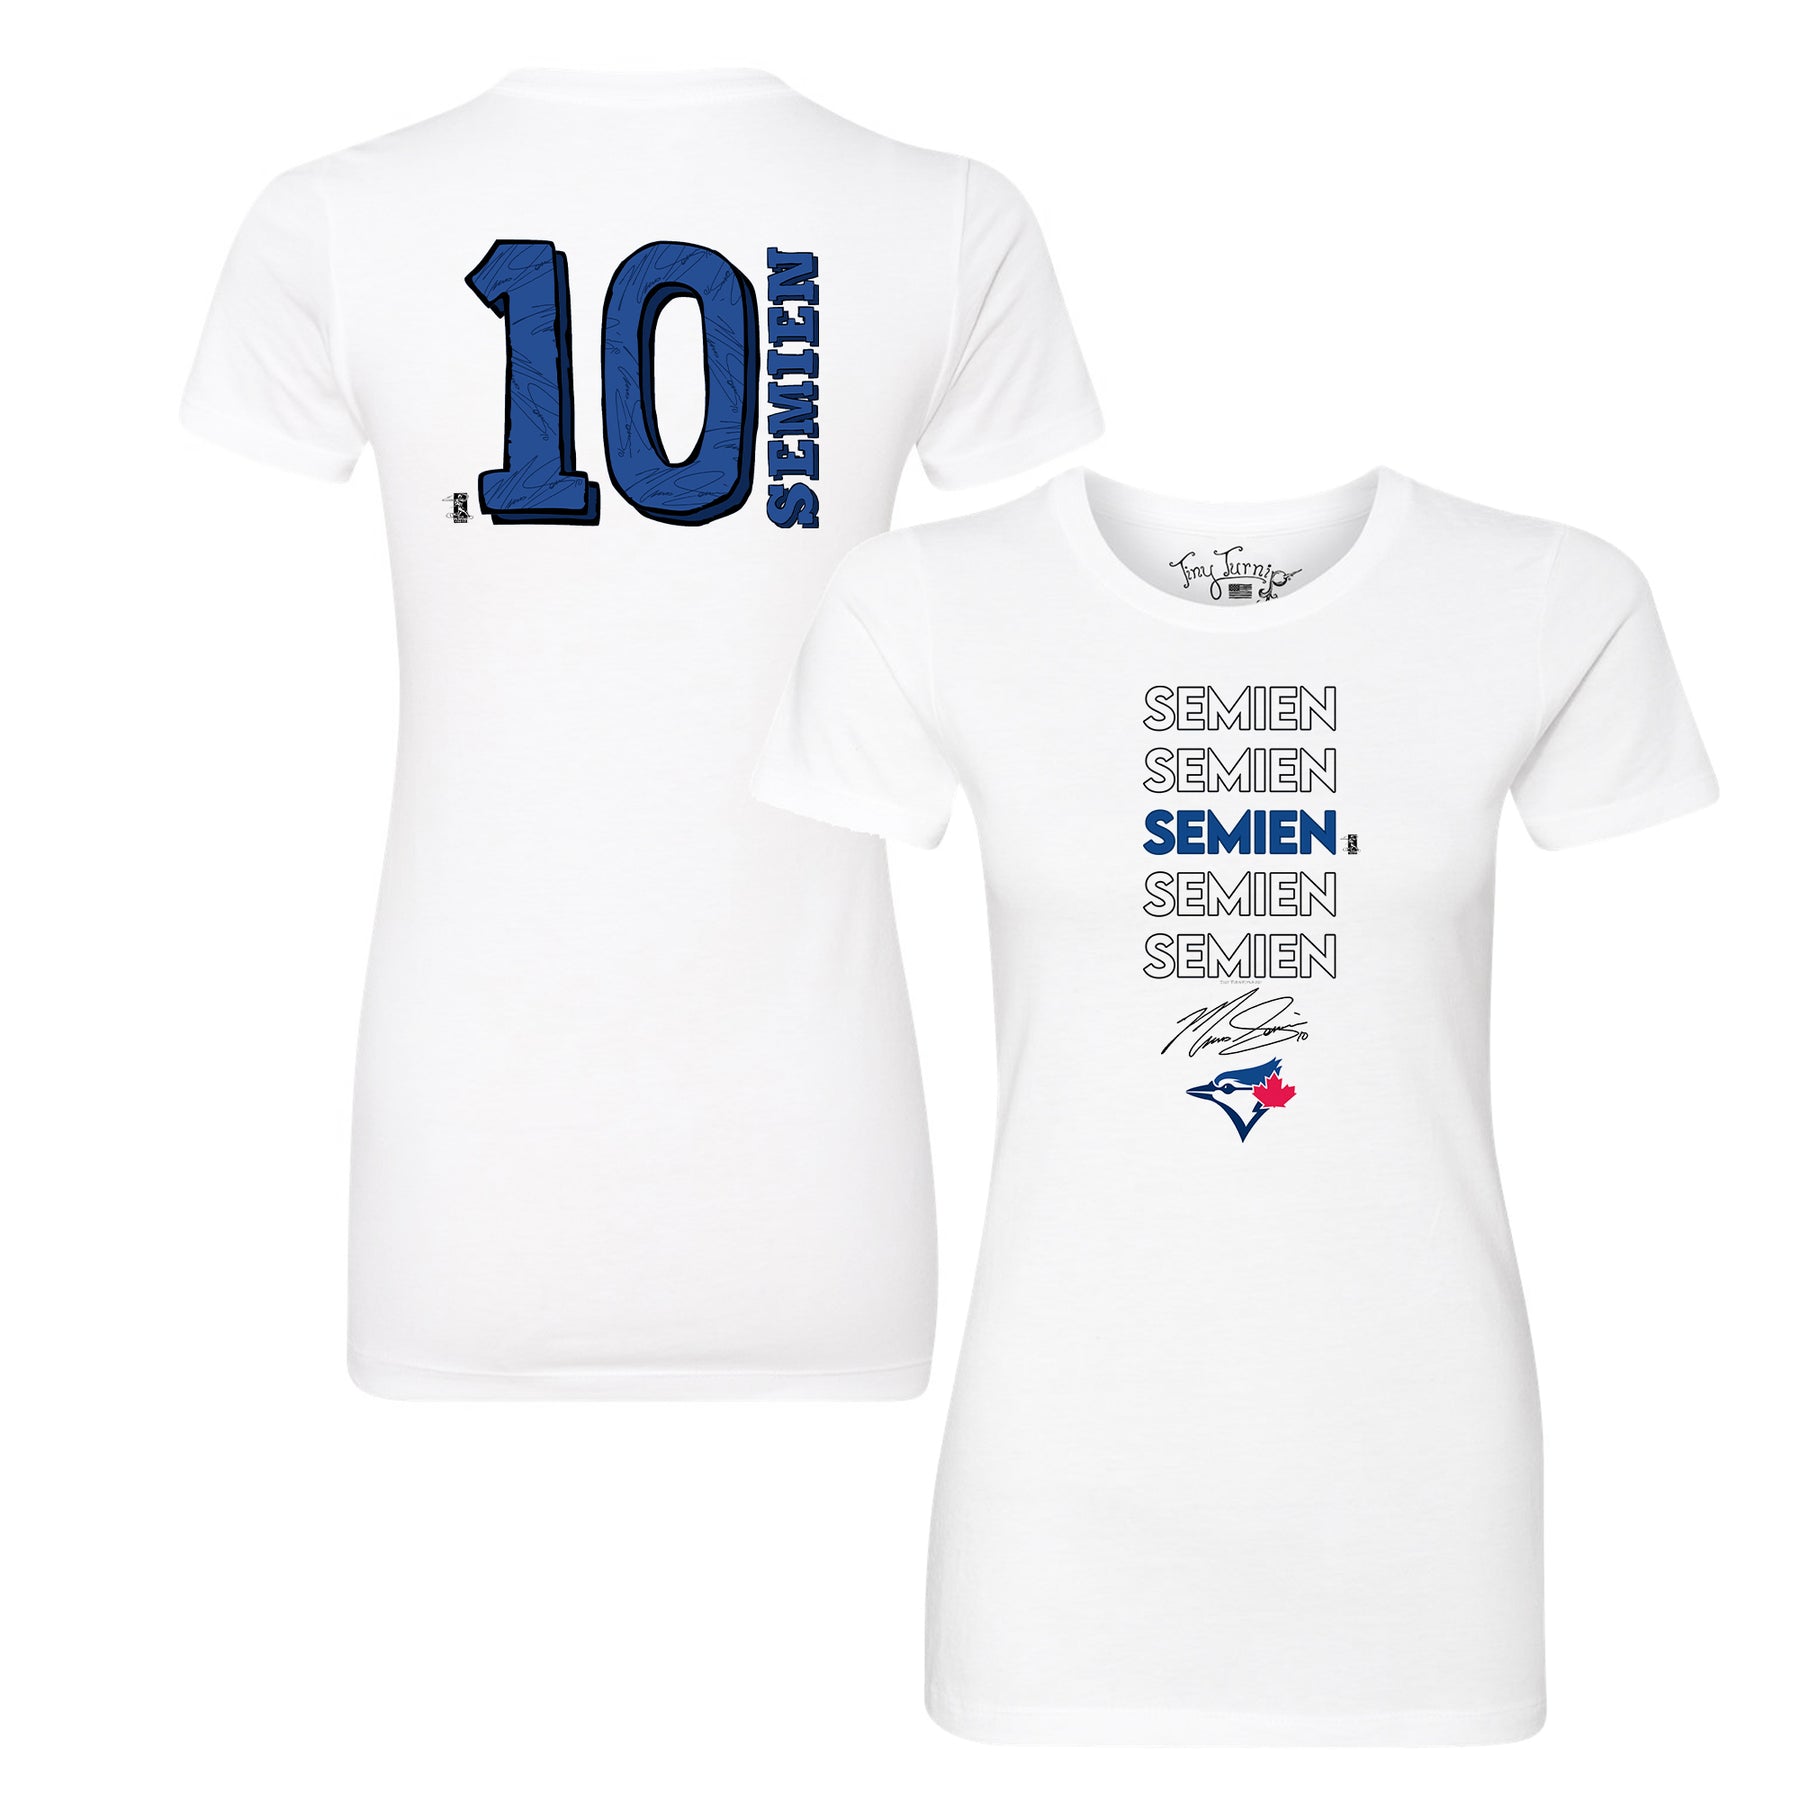 10 stores to buy Blue Jays clothing in Toronto